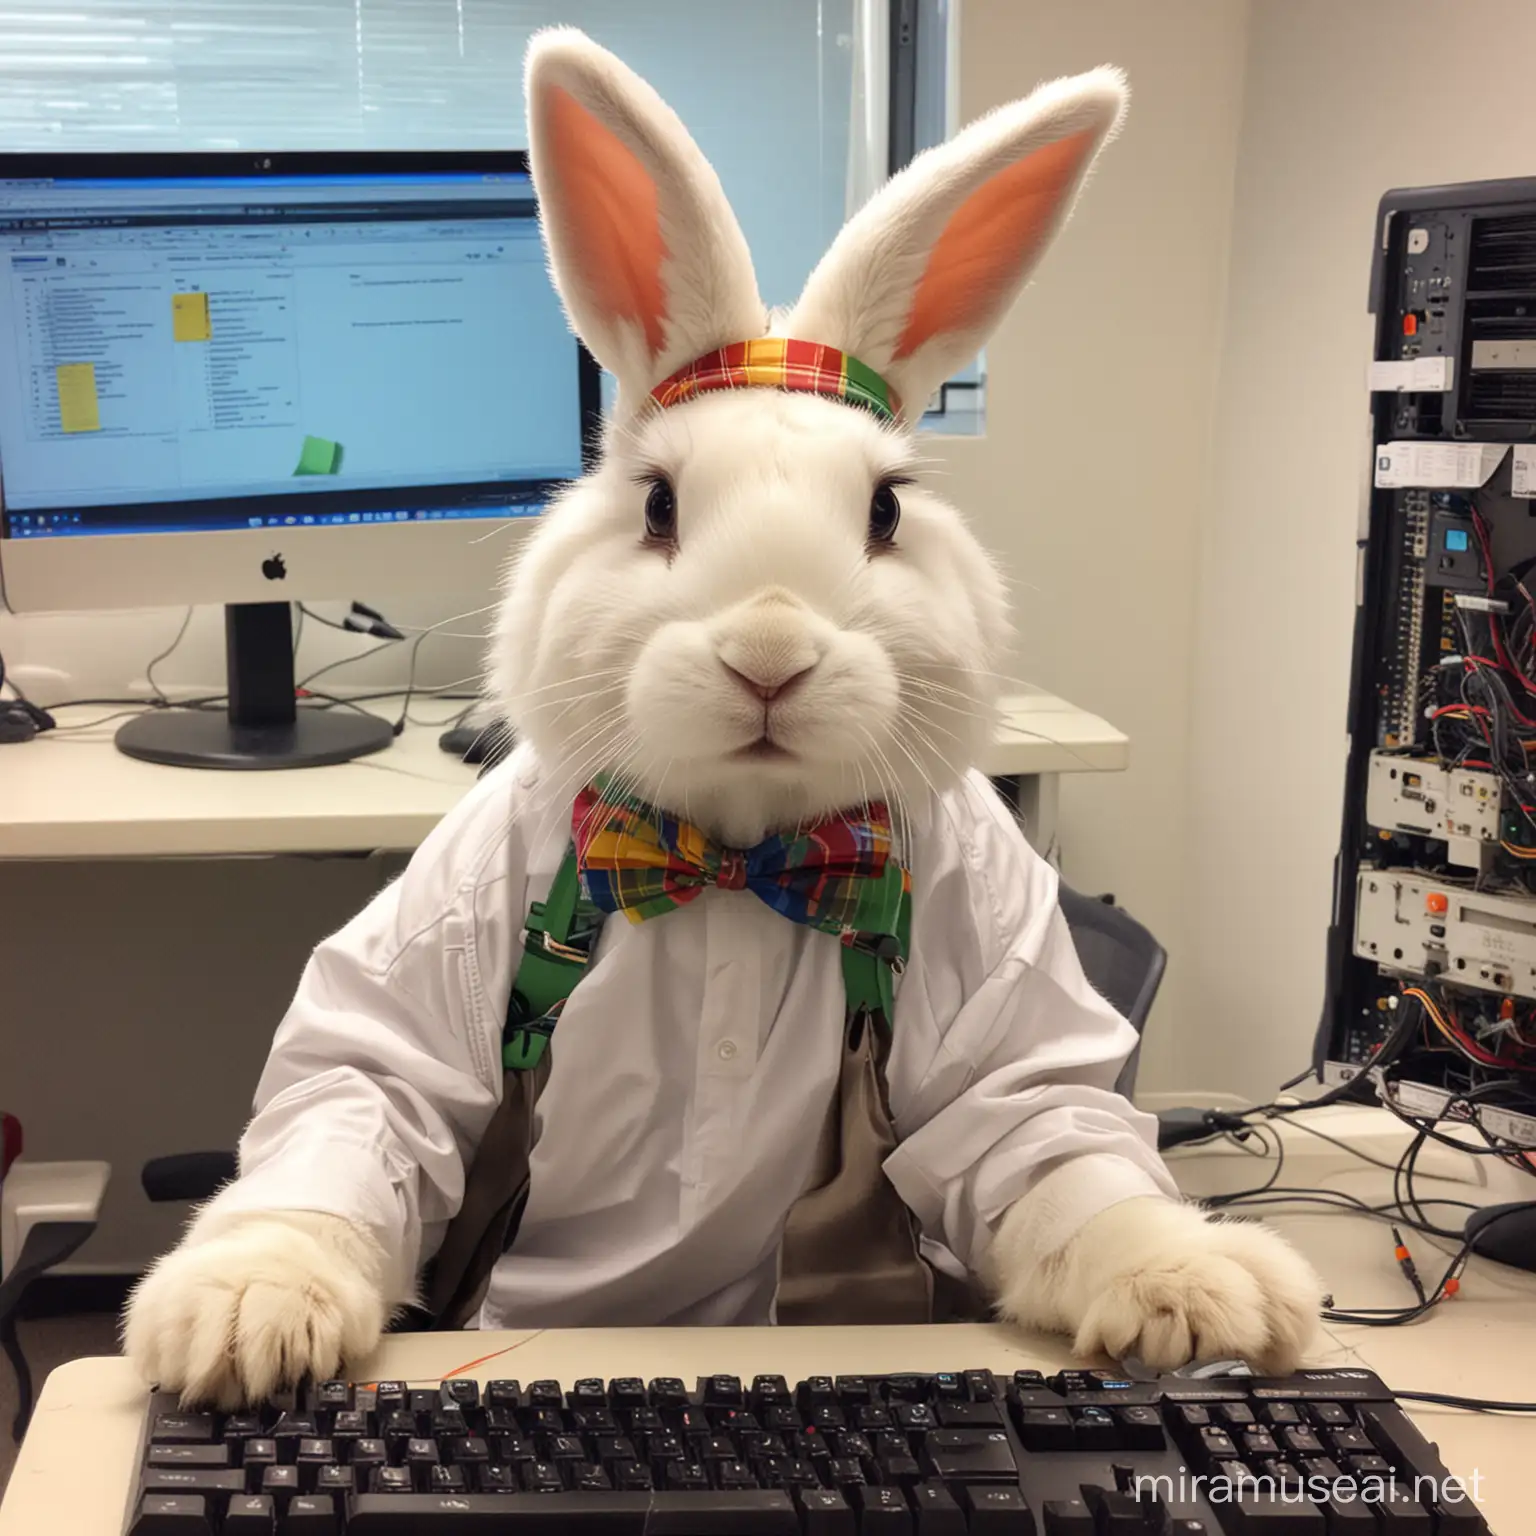 Easter Bunny IT Technician Balancing Work and Holiday Spirit